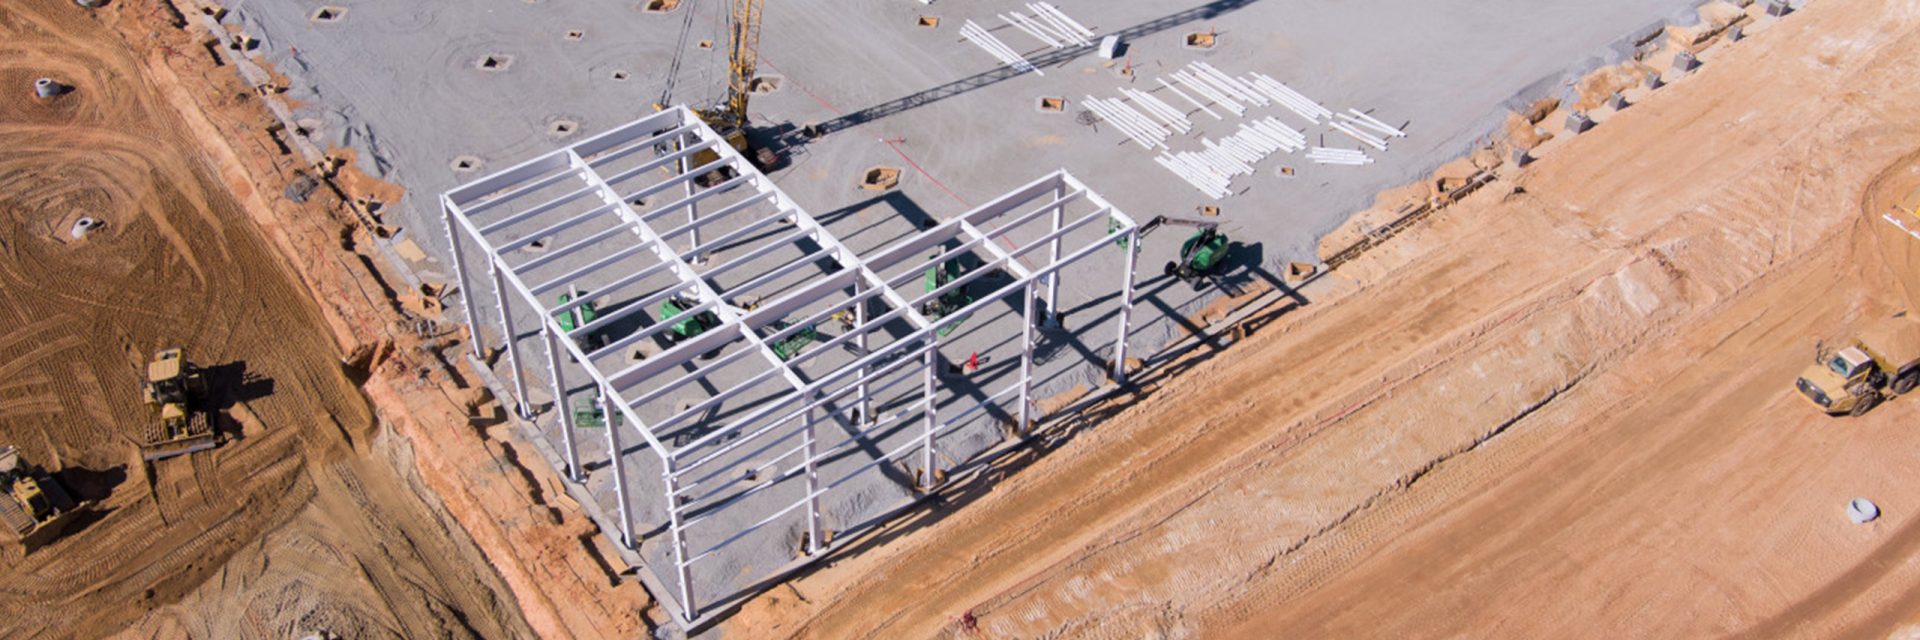 Plant Woodruff construction site showing trucks, equipment and first building beams erected. 